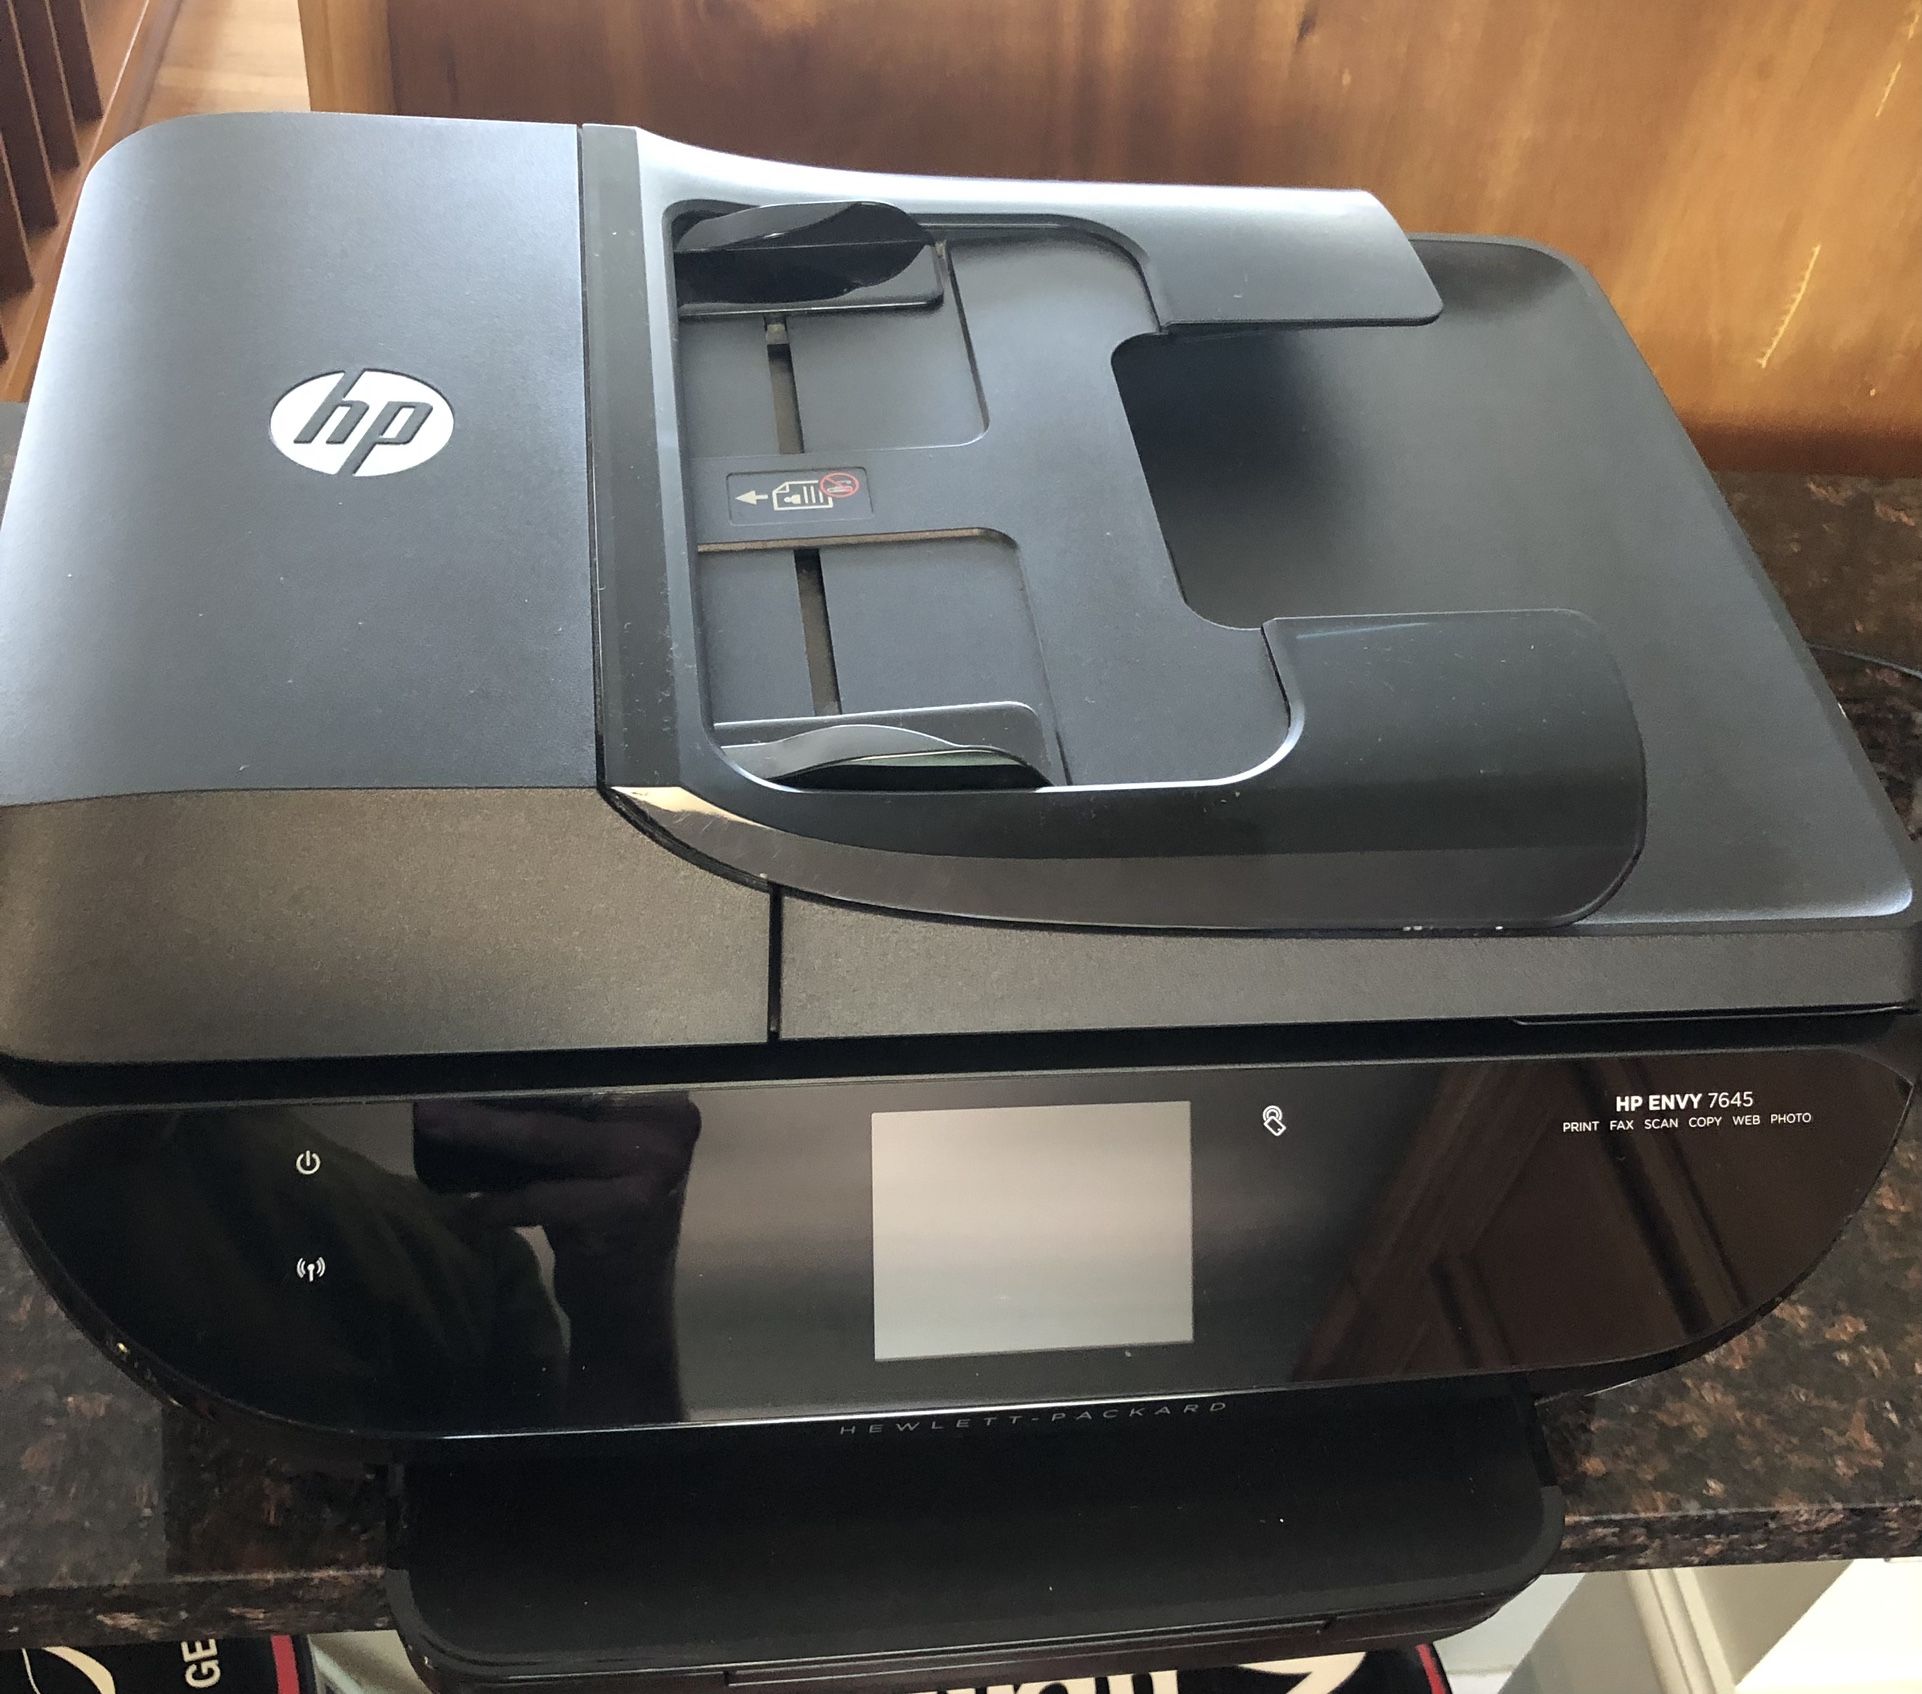 HP Envy 7645 all in one printer  Works great